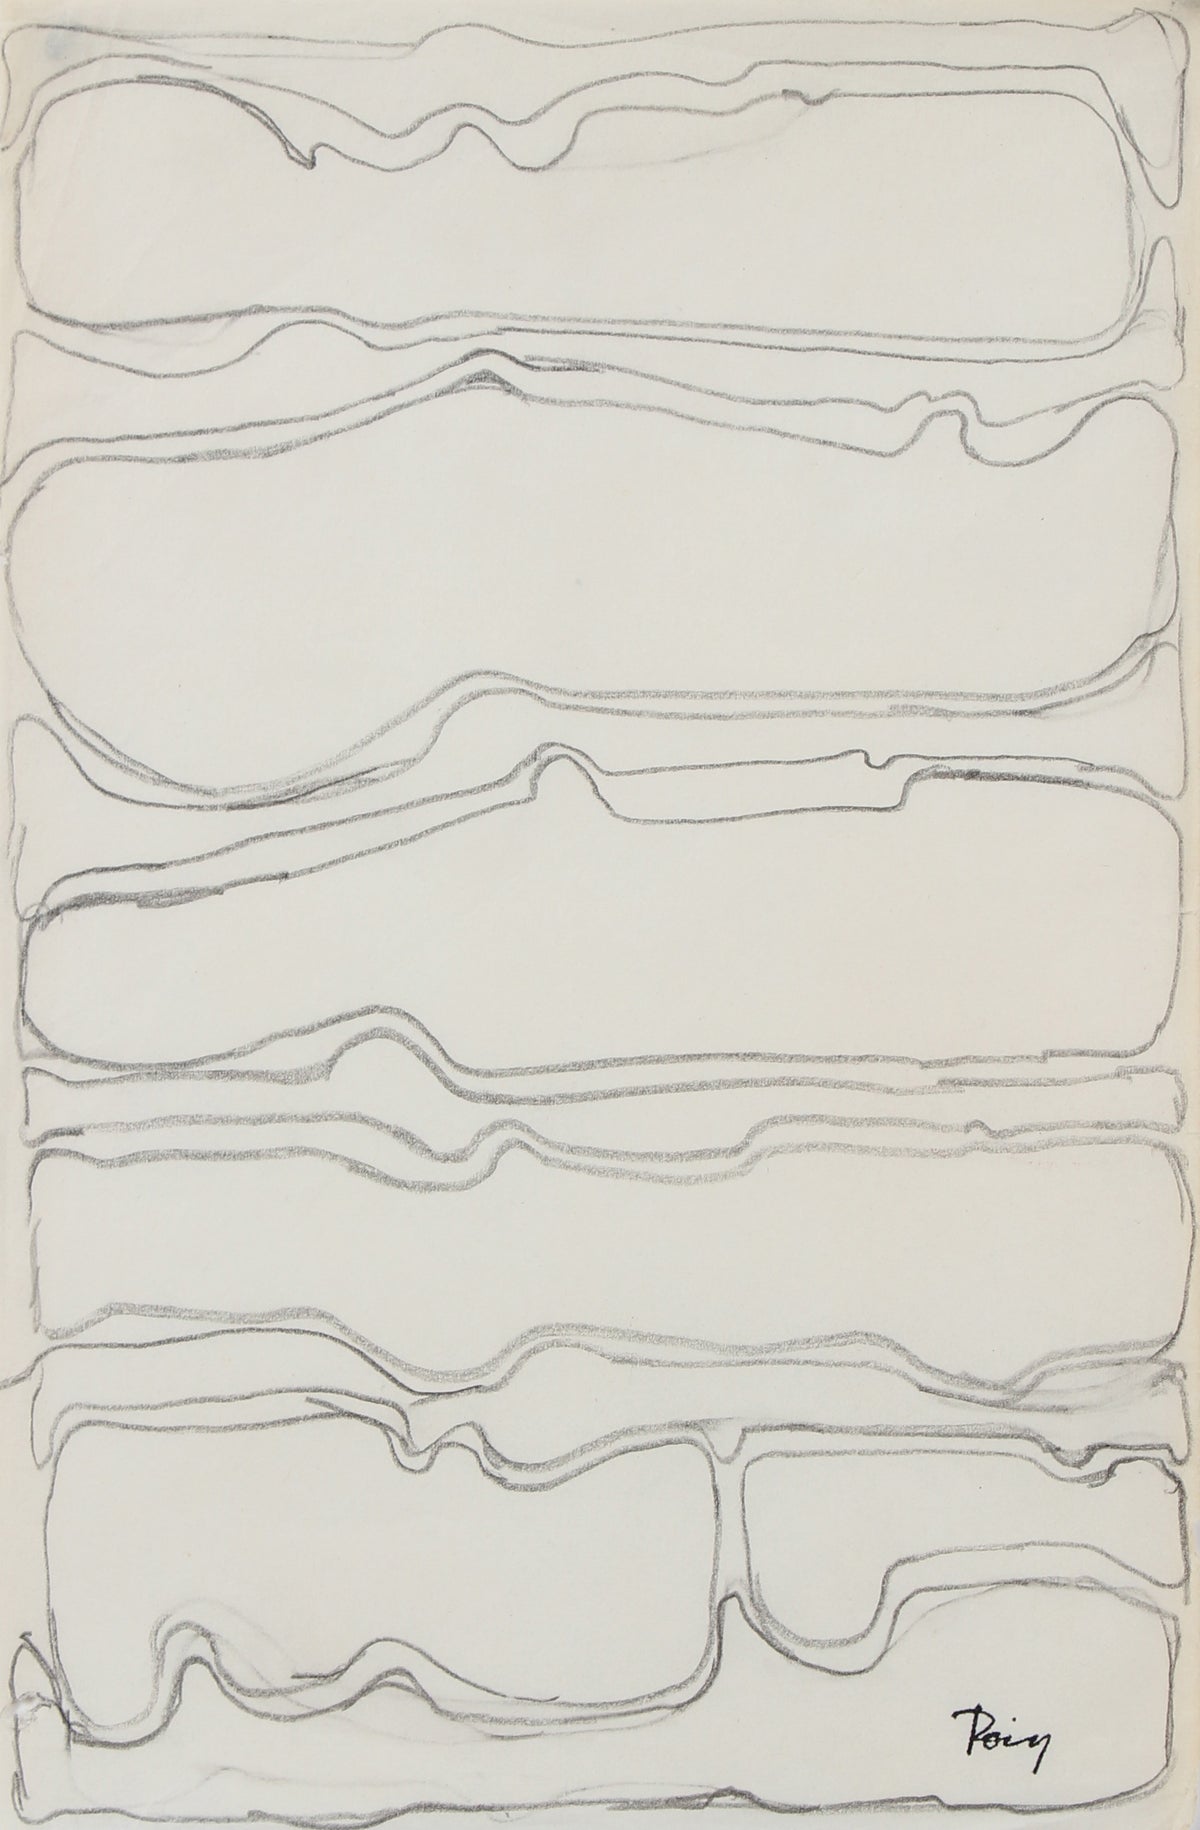 Stacked Abstract Lines &lt;br&gt;1960s Graphite &lt;br&gt;&lt;br&gt;#97736